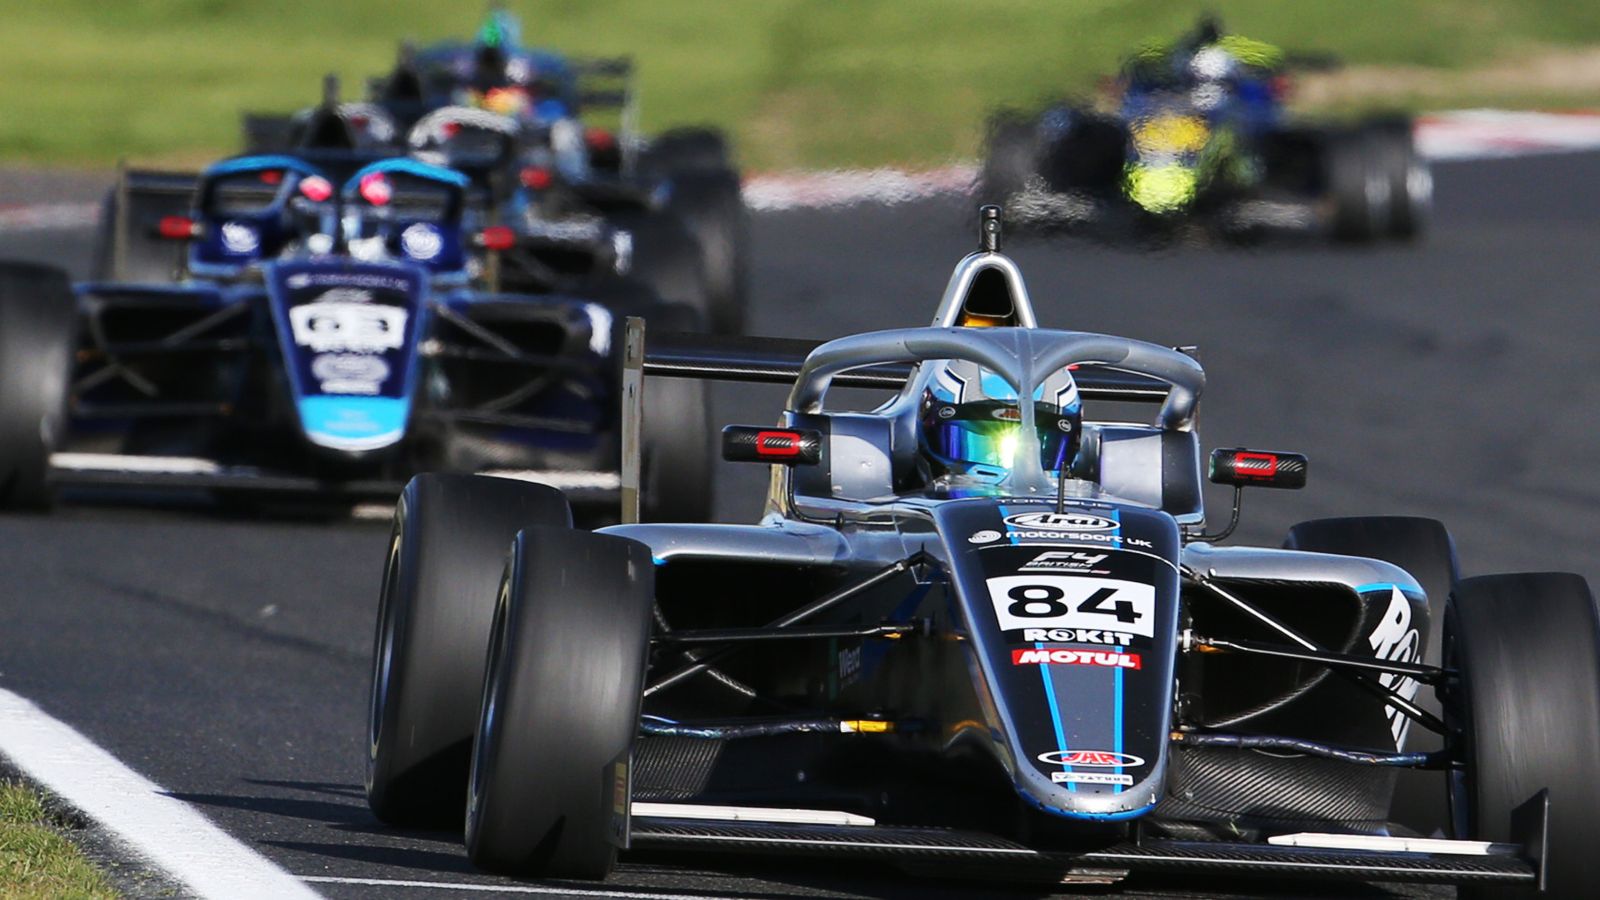 F1® Academy - The Official Home of F1® Academy Racing